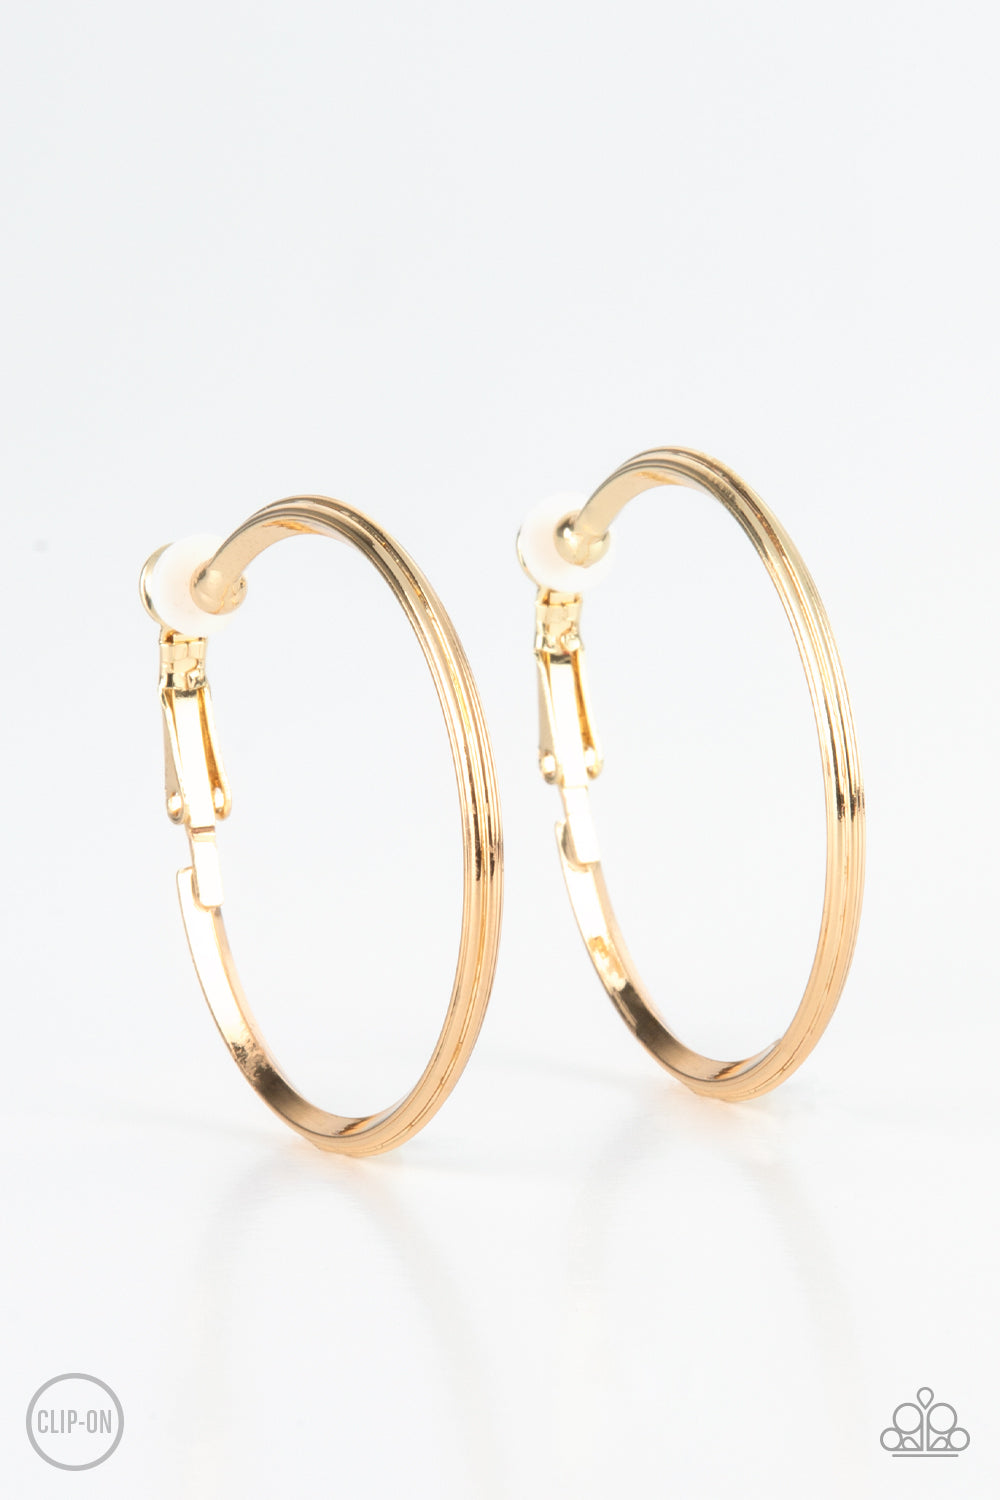 Etched in fine lines, a beveled gold hoop curls around the ear for a classic look. Hoop measures approximately 1 1/2" in diameter. Earring attaches to a standard clip-on fitting.